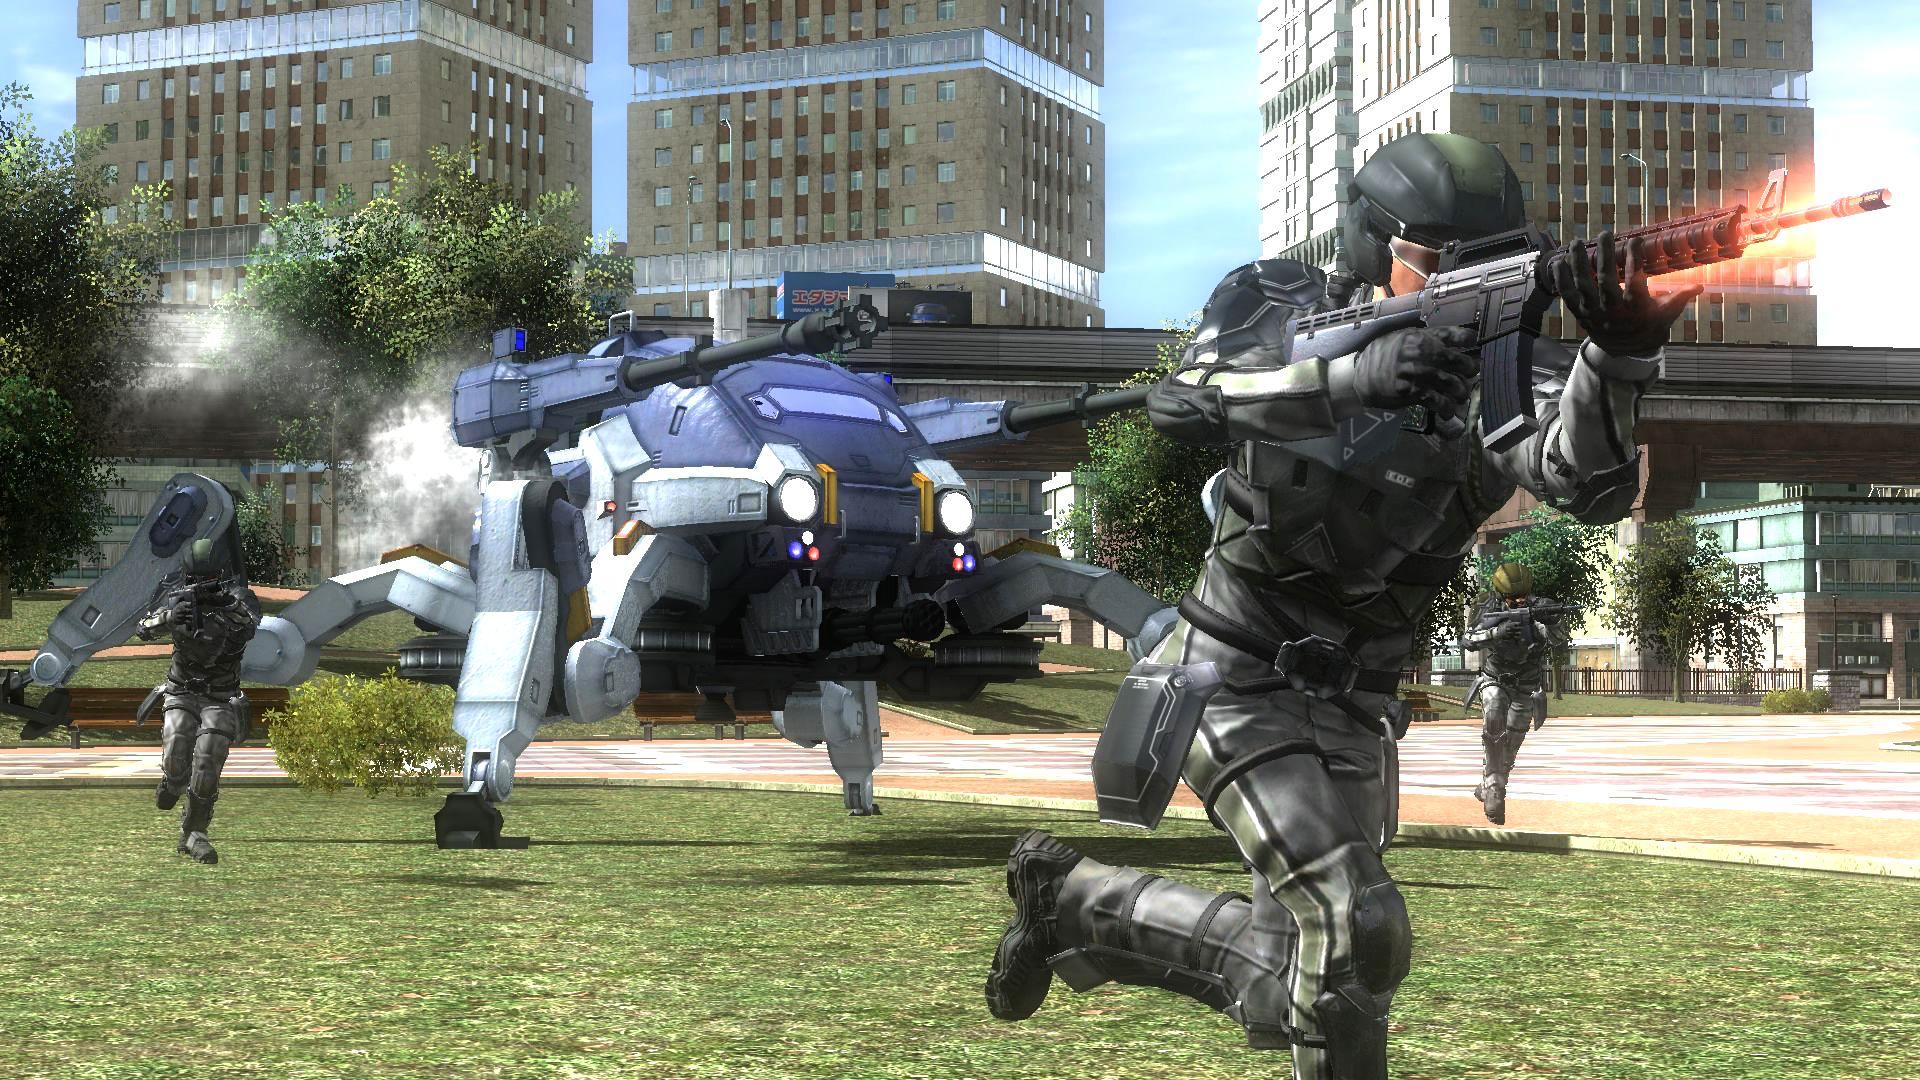 Earth Defense Force 4.1 & Earth Defense Force 2 Europe Release is